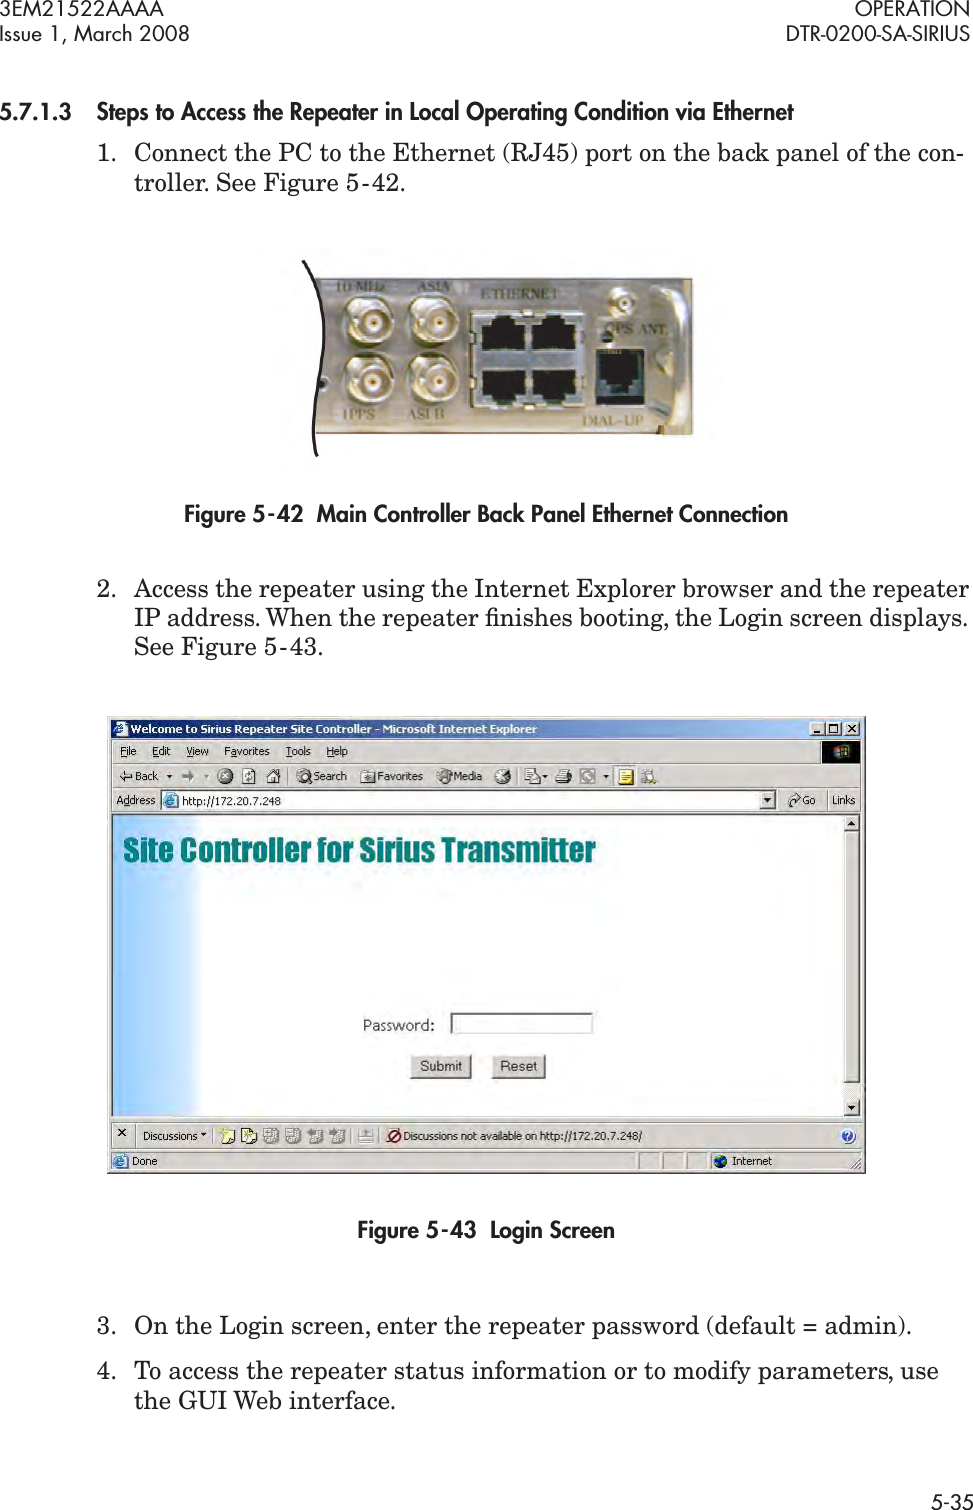 3EM21522AAAA OPERATIONIssue 1, March 2008 DTR-0200-SA-SIRIUS5-355.7.1.3Steps to Access the Repeater in Local Operating Condition via Ethernet1. Connect the PC to the Ethernet (RJ45) port on the back panel of the con-troller. See Figure 5  -  42.Figure 5  -  42  Main Controller Back Panel Ethernet Connection2. Access the repeater using the Internet Explorer browser and the repeater IP address. When the repeater ﬁnishes booting, the Login screen displays. See Figure 5  -  43.Figure 5  -  43  Login Screen3. On the Login screen, enter the repeater password (default = admin).4. To access the repeater status information or to modify parameters, use the GUI Web interface.